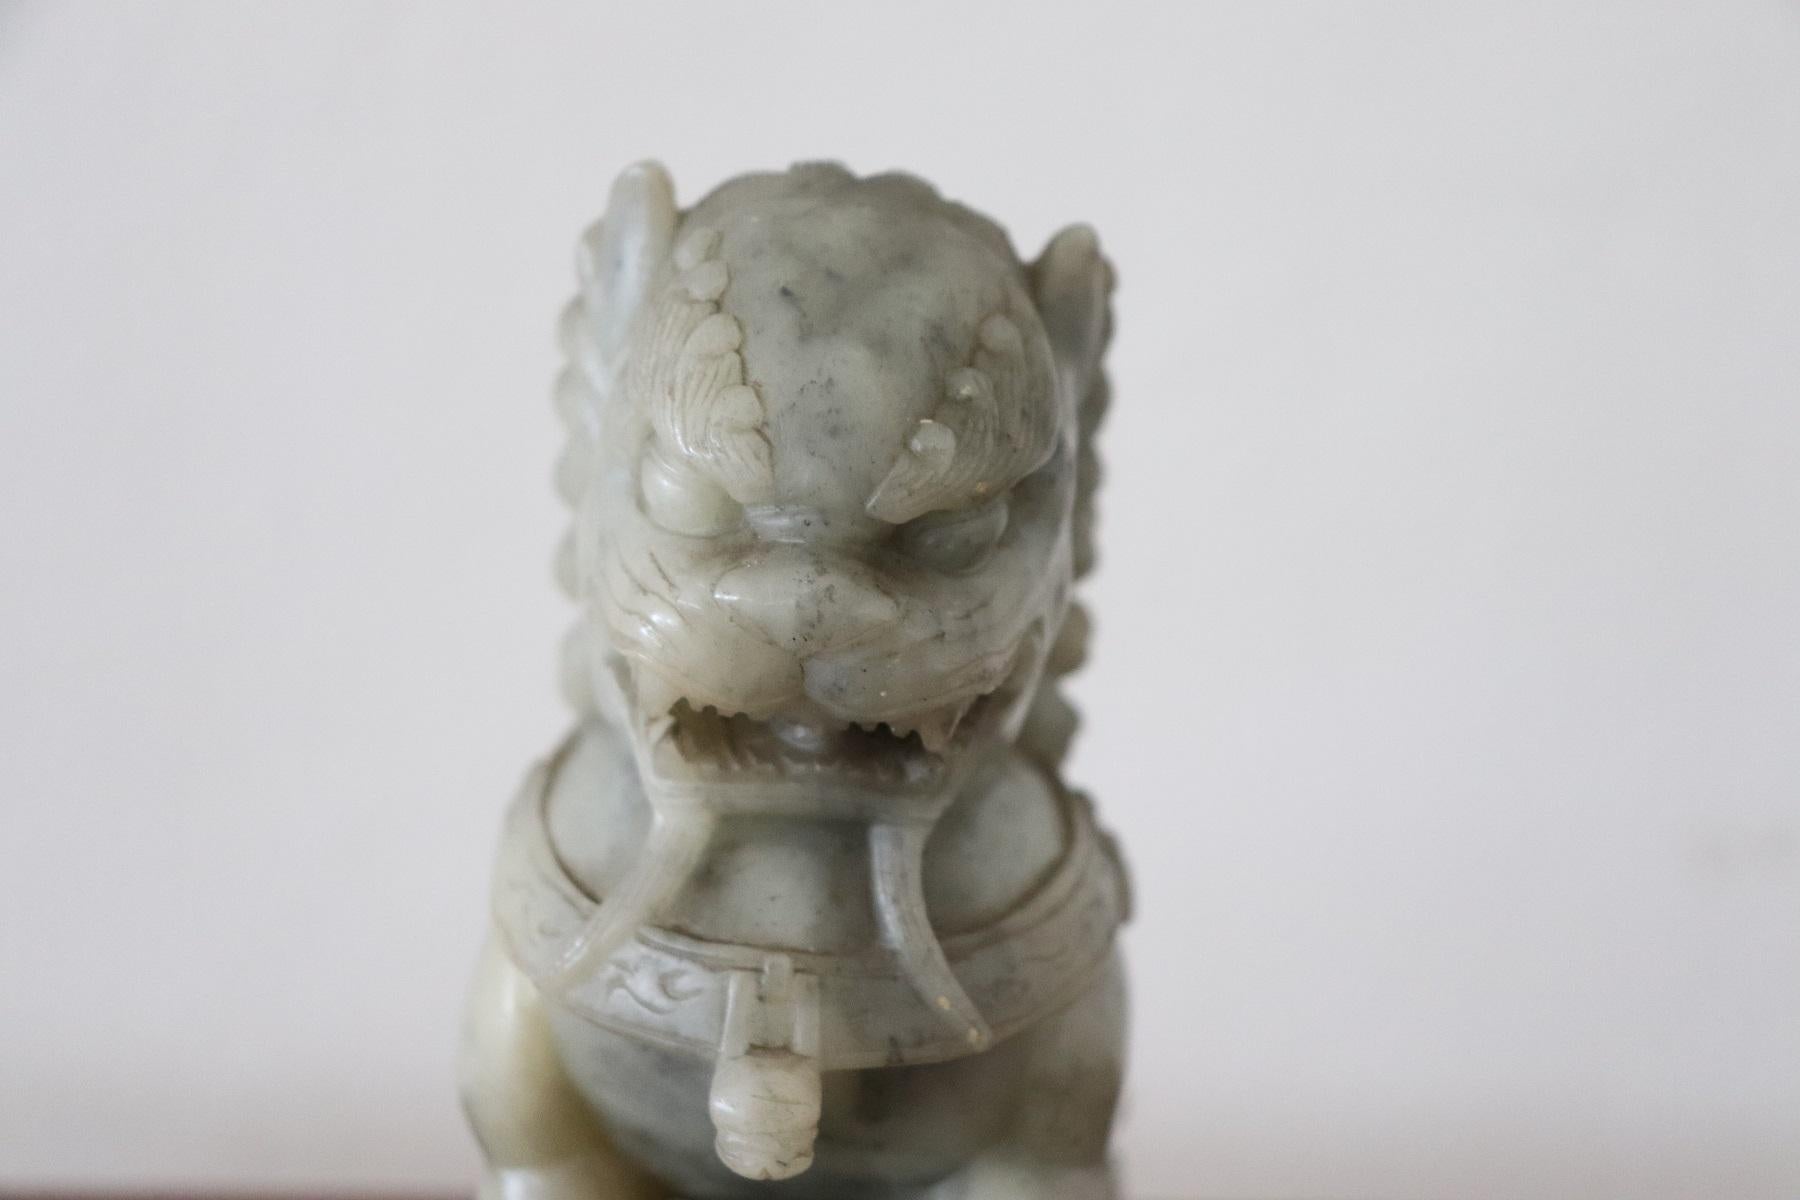 Beautiful antique sculpture in precious green jade made in china. Fine figure of Lion in Chinese symbolic culture they are guardians of the temple.